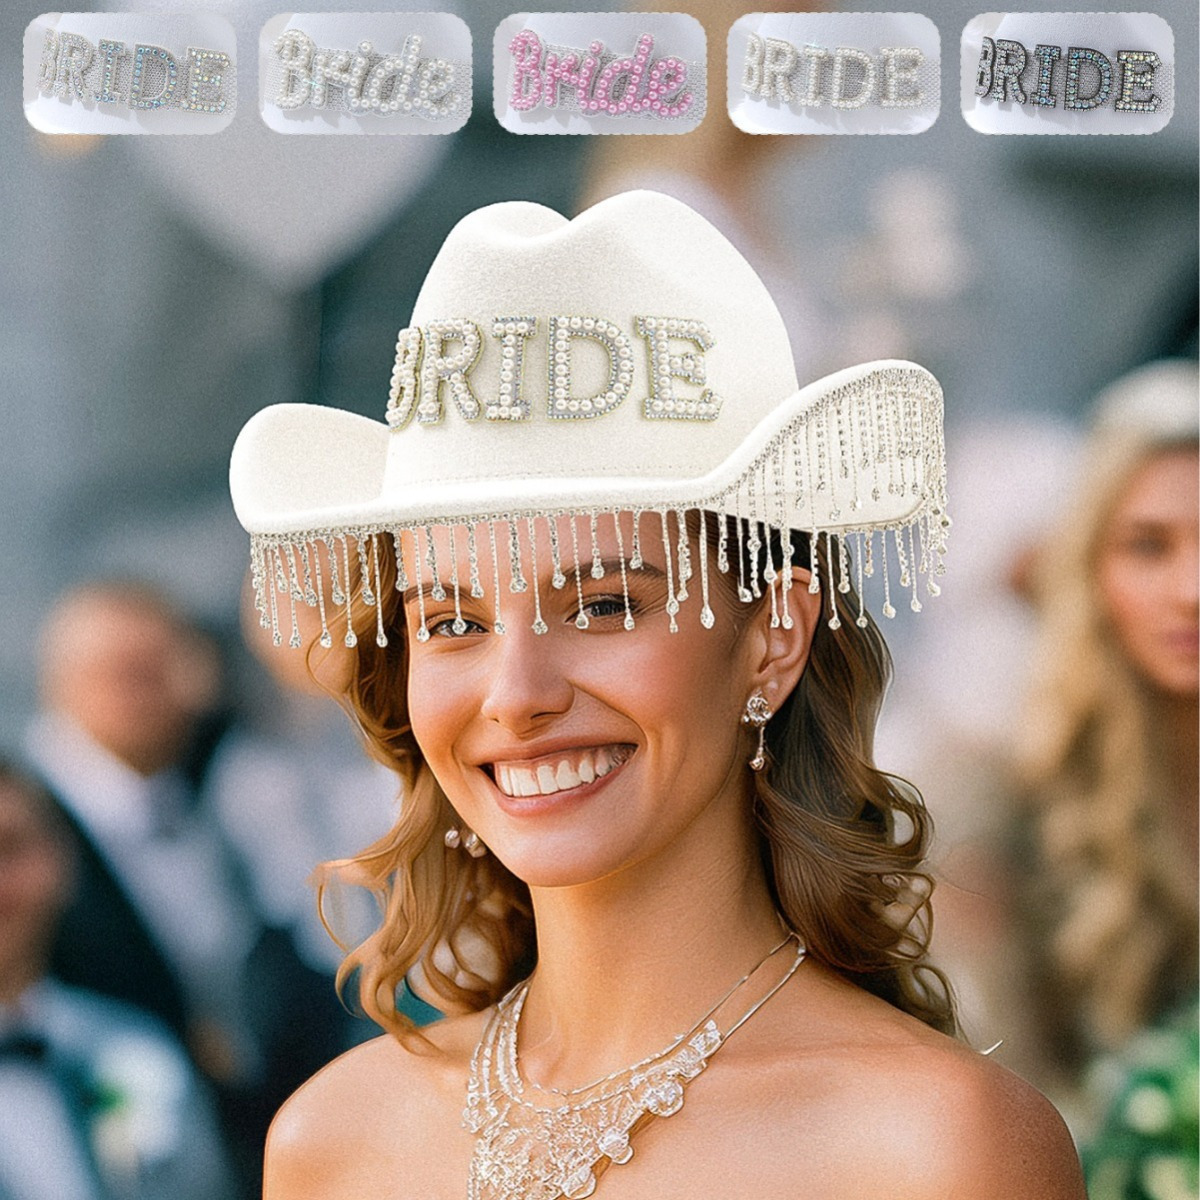 

White "bride" Rhinestone Cowboy Hat With Fringe, Luxurious Faux Pearl Accents, Western Themed Wedding Felt Hat For Bridal Bachelorette Party Festive Occasions